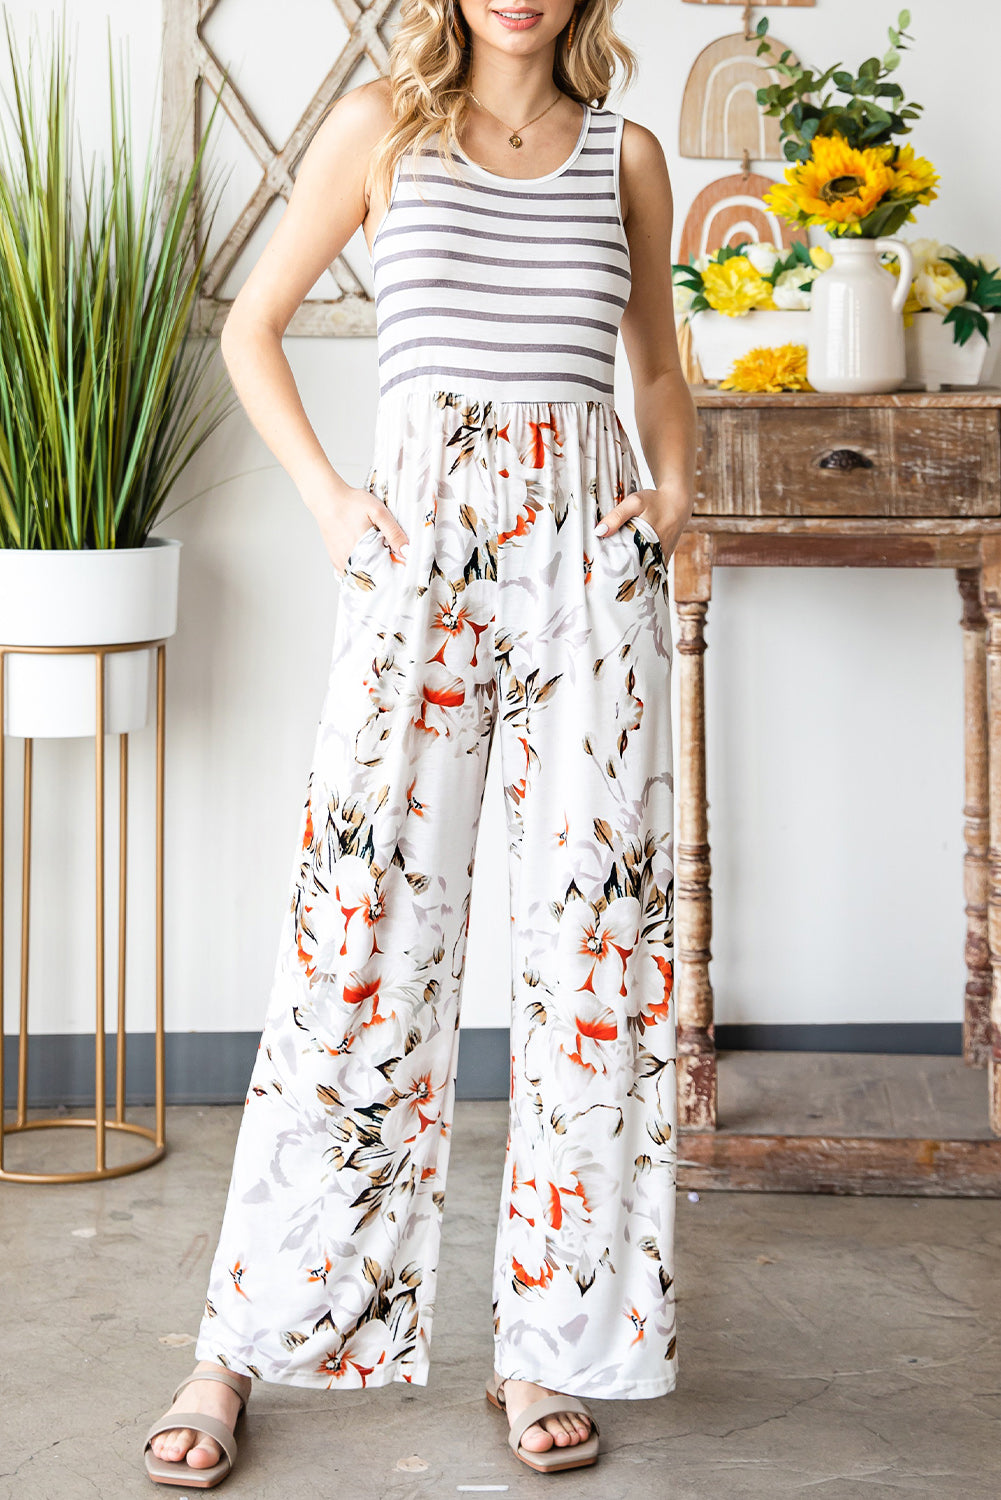 Striped Floral Sleeveless Wide Leg Jumpsuit with Pockets - Shop women apparel, Jewelry, bath & beauty products online - Arwen's Boutique